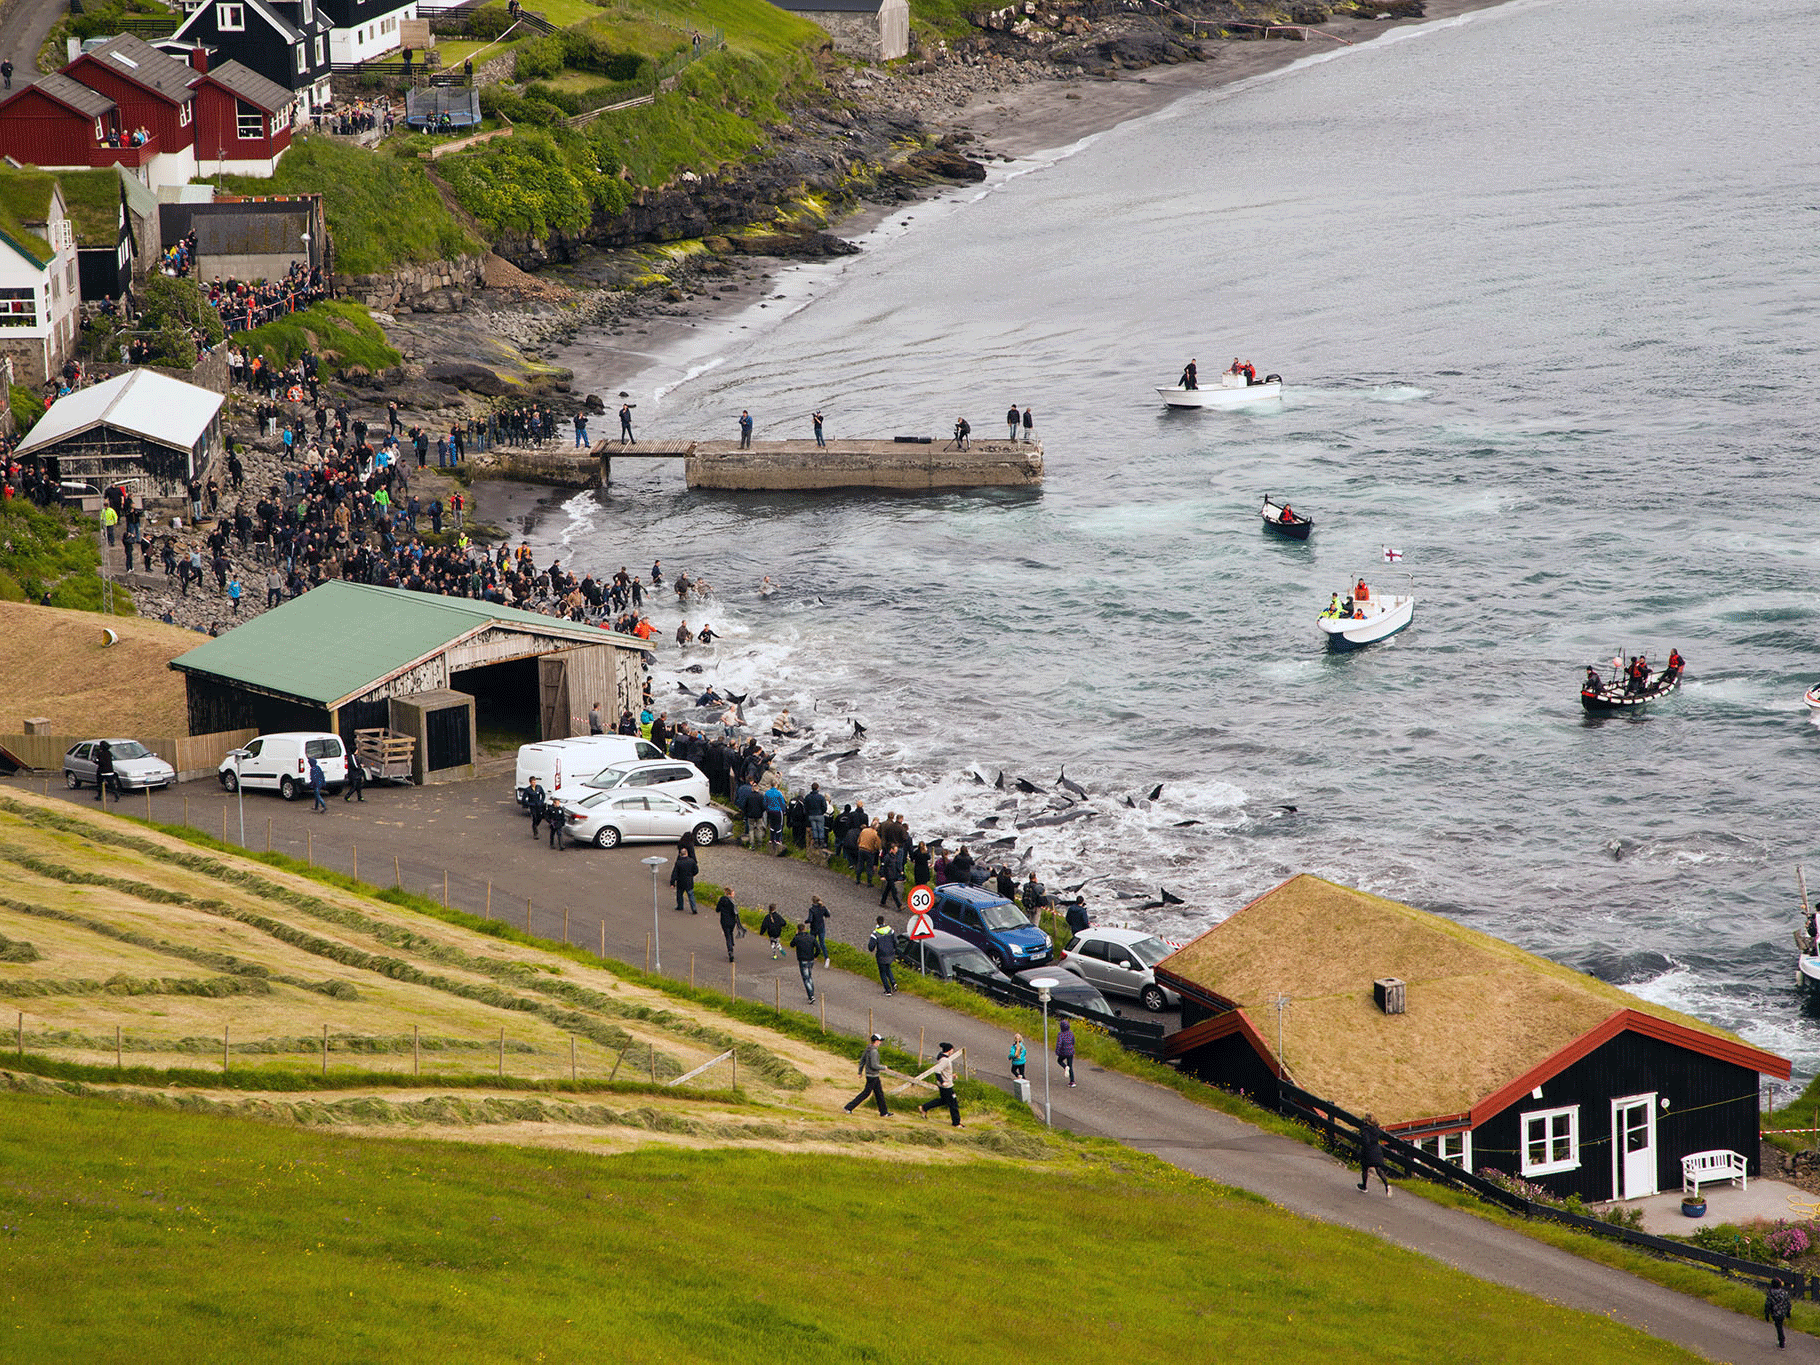 The wales were chased towards a Faroe Islands beach